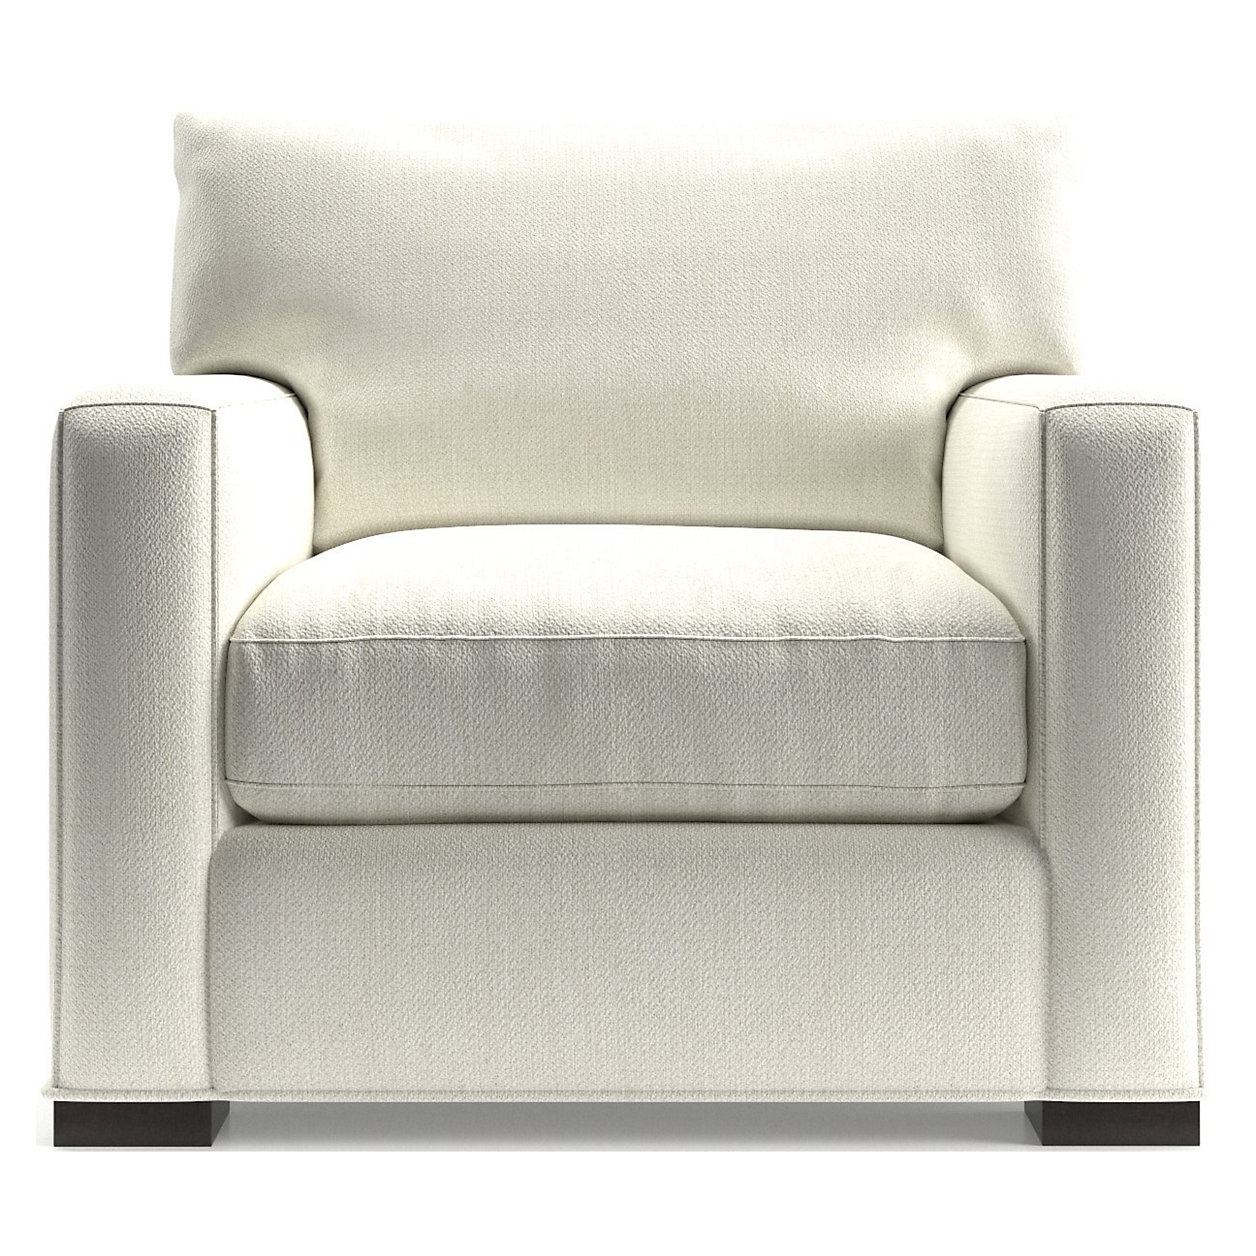 Axis 40" Chair - Image 1